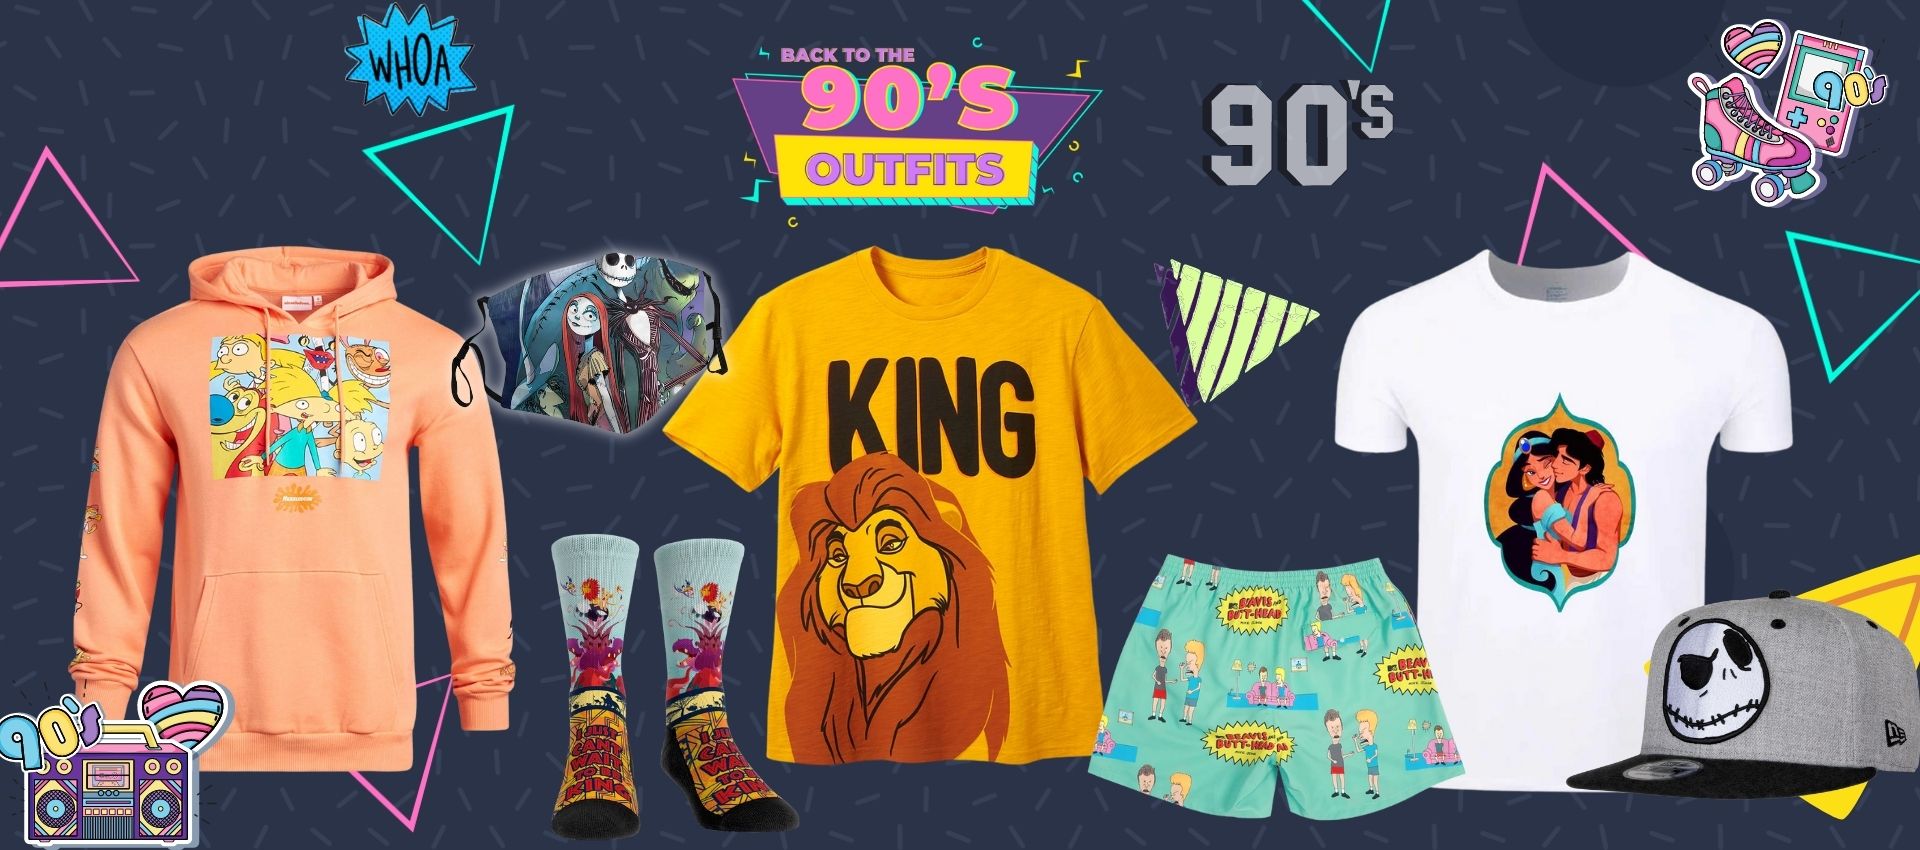 90s Outfits Web Banner - 90s Outfits